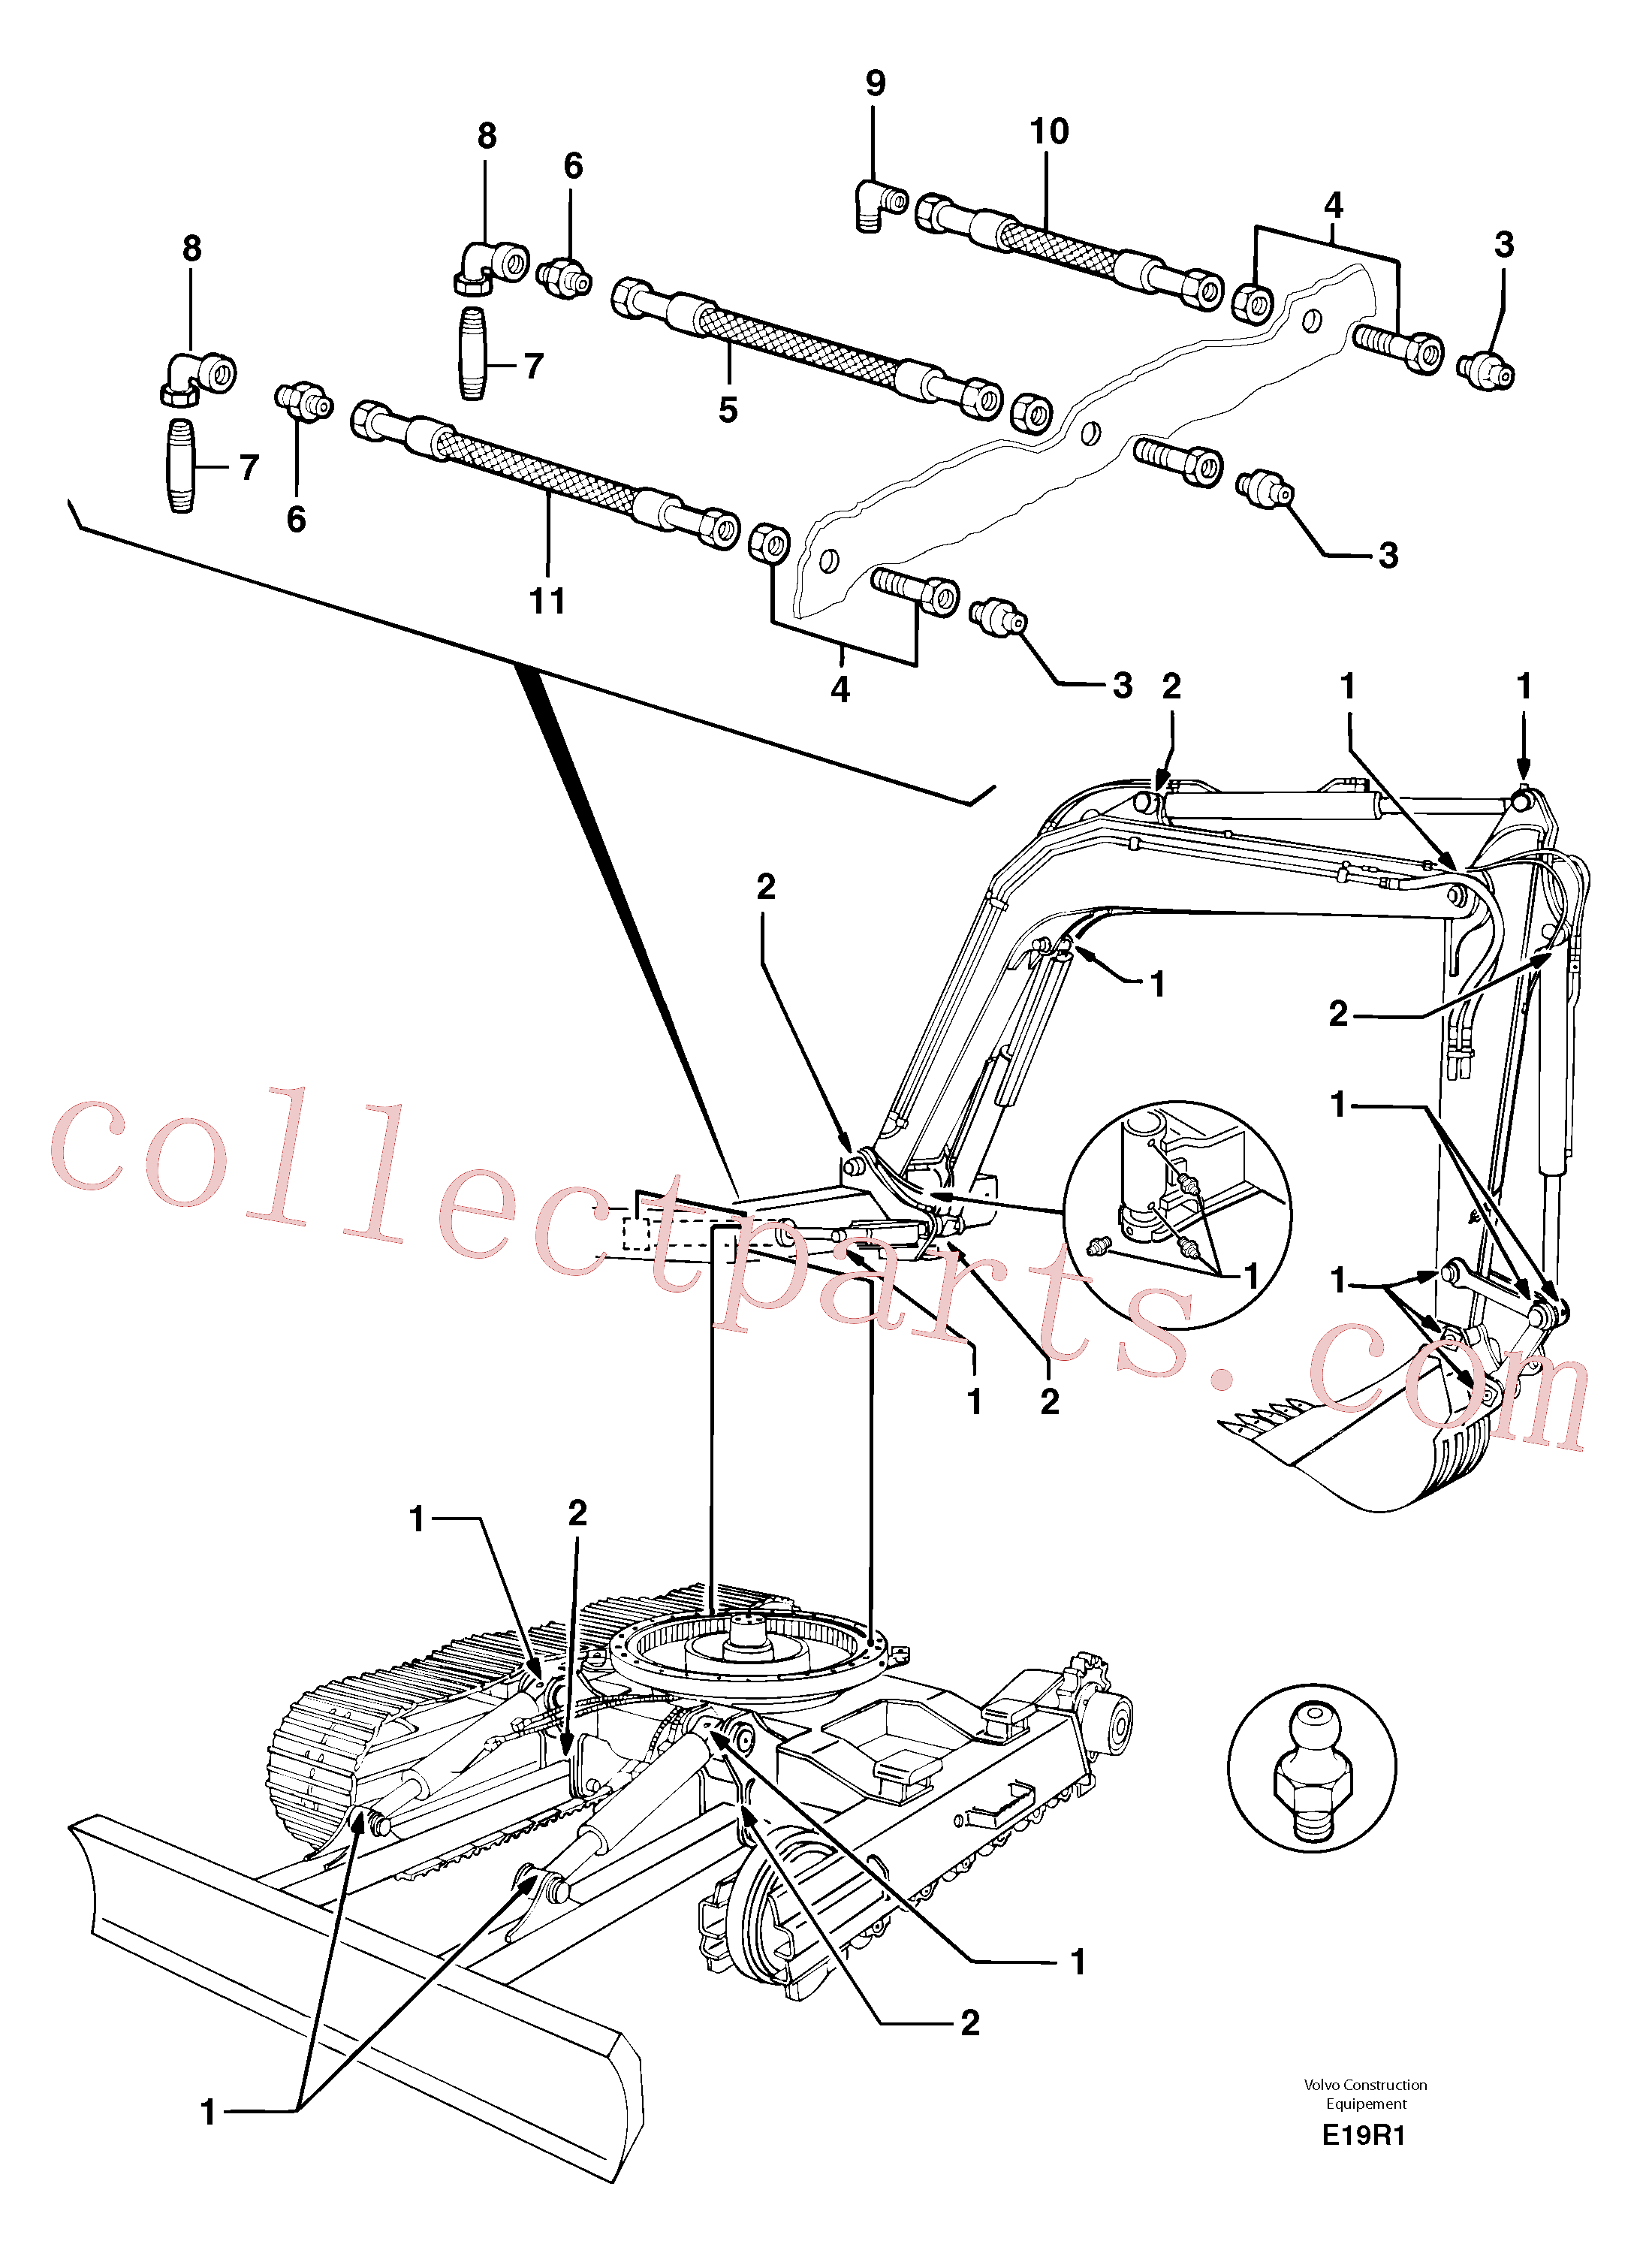 PJ7450194 for Volvo Lubrication chart(E19R1 assembly)